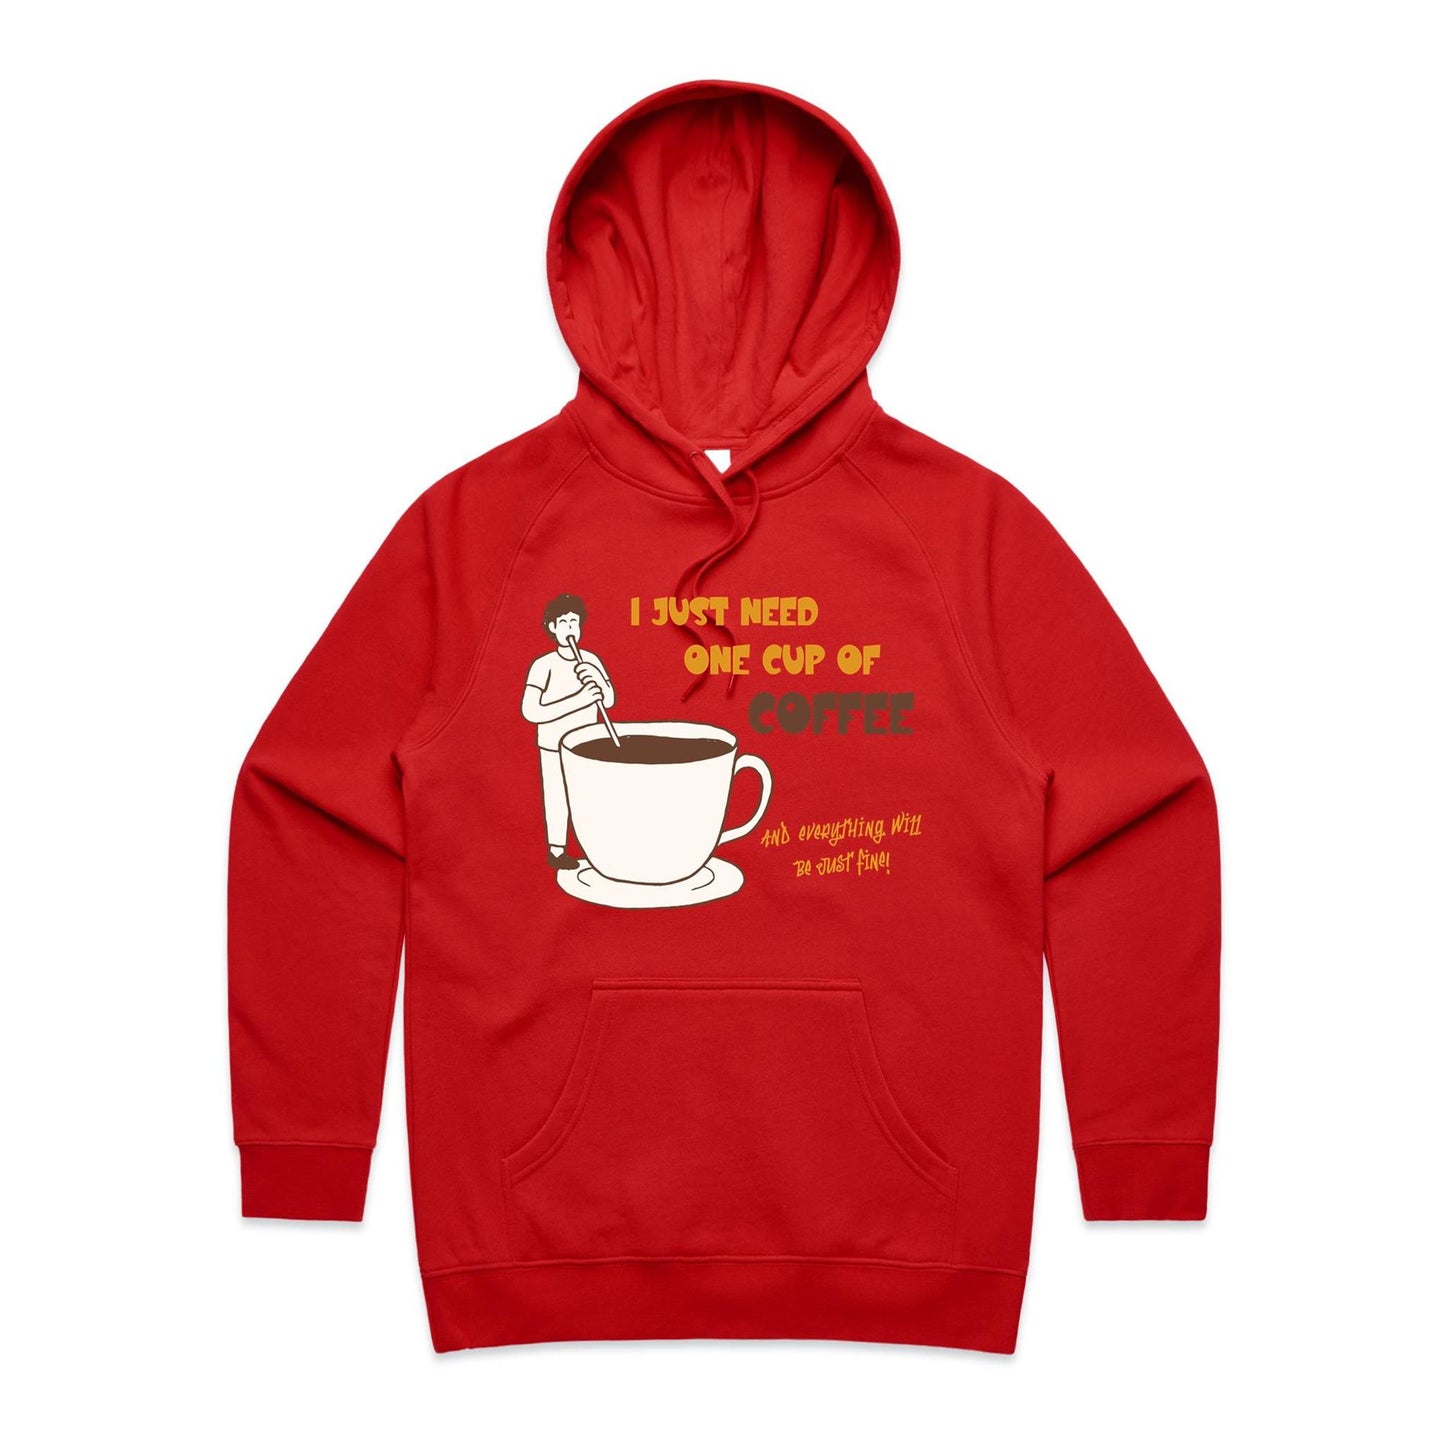 I Just Need One Cup Of Coffee And Everything Will Be Just Fine - Women's Supply Hood Red Womens Supply Hoodie Coffee